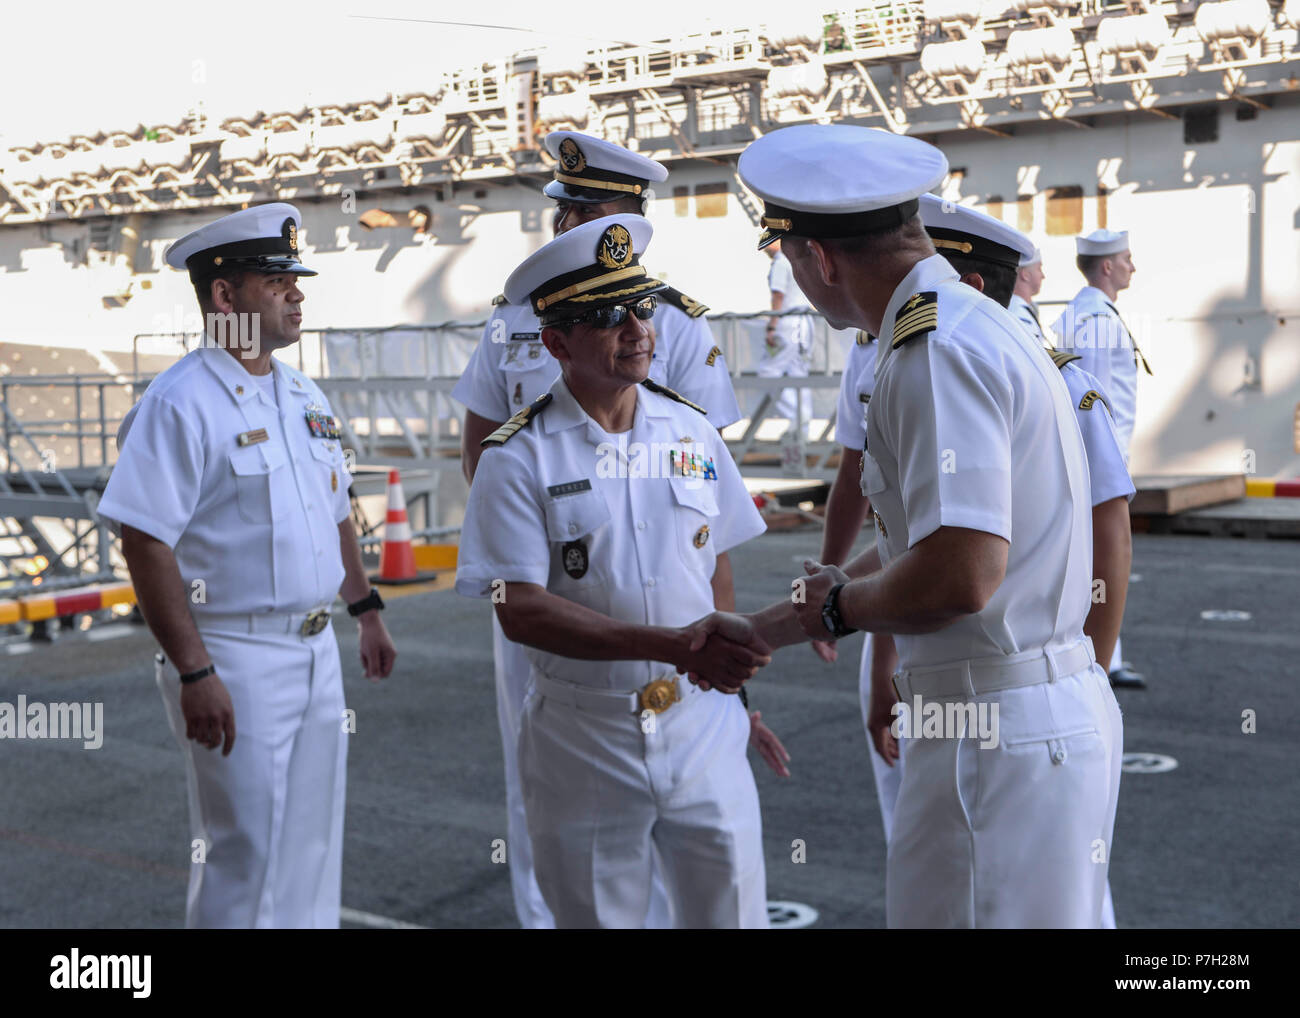 180627-N-PX867-093 SAN DIEGO (June 27, 2018) Mexican Navy Capt. Jose Enrique Perez Munoz is welcomed on the quarter deck by Capt. Ronald A. Dowdell, executive officer of amphibious assault ship USS Boxer (LHD 4), during the Southern California portion of the Rim of the Pacific (RIMPAC SOCAL) opening reception June 27. Twenty-five nations, more than 45 ships and submarines, about 200 aircraft, and 25,000 personnel are participating in RIMPAC from June 27 to Aug. 2 in and around the Hawaiian Islands and Southern California. The world’s largest international maritime exercise, RIMPAC provides a u Stock Photo